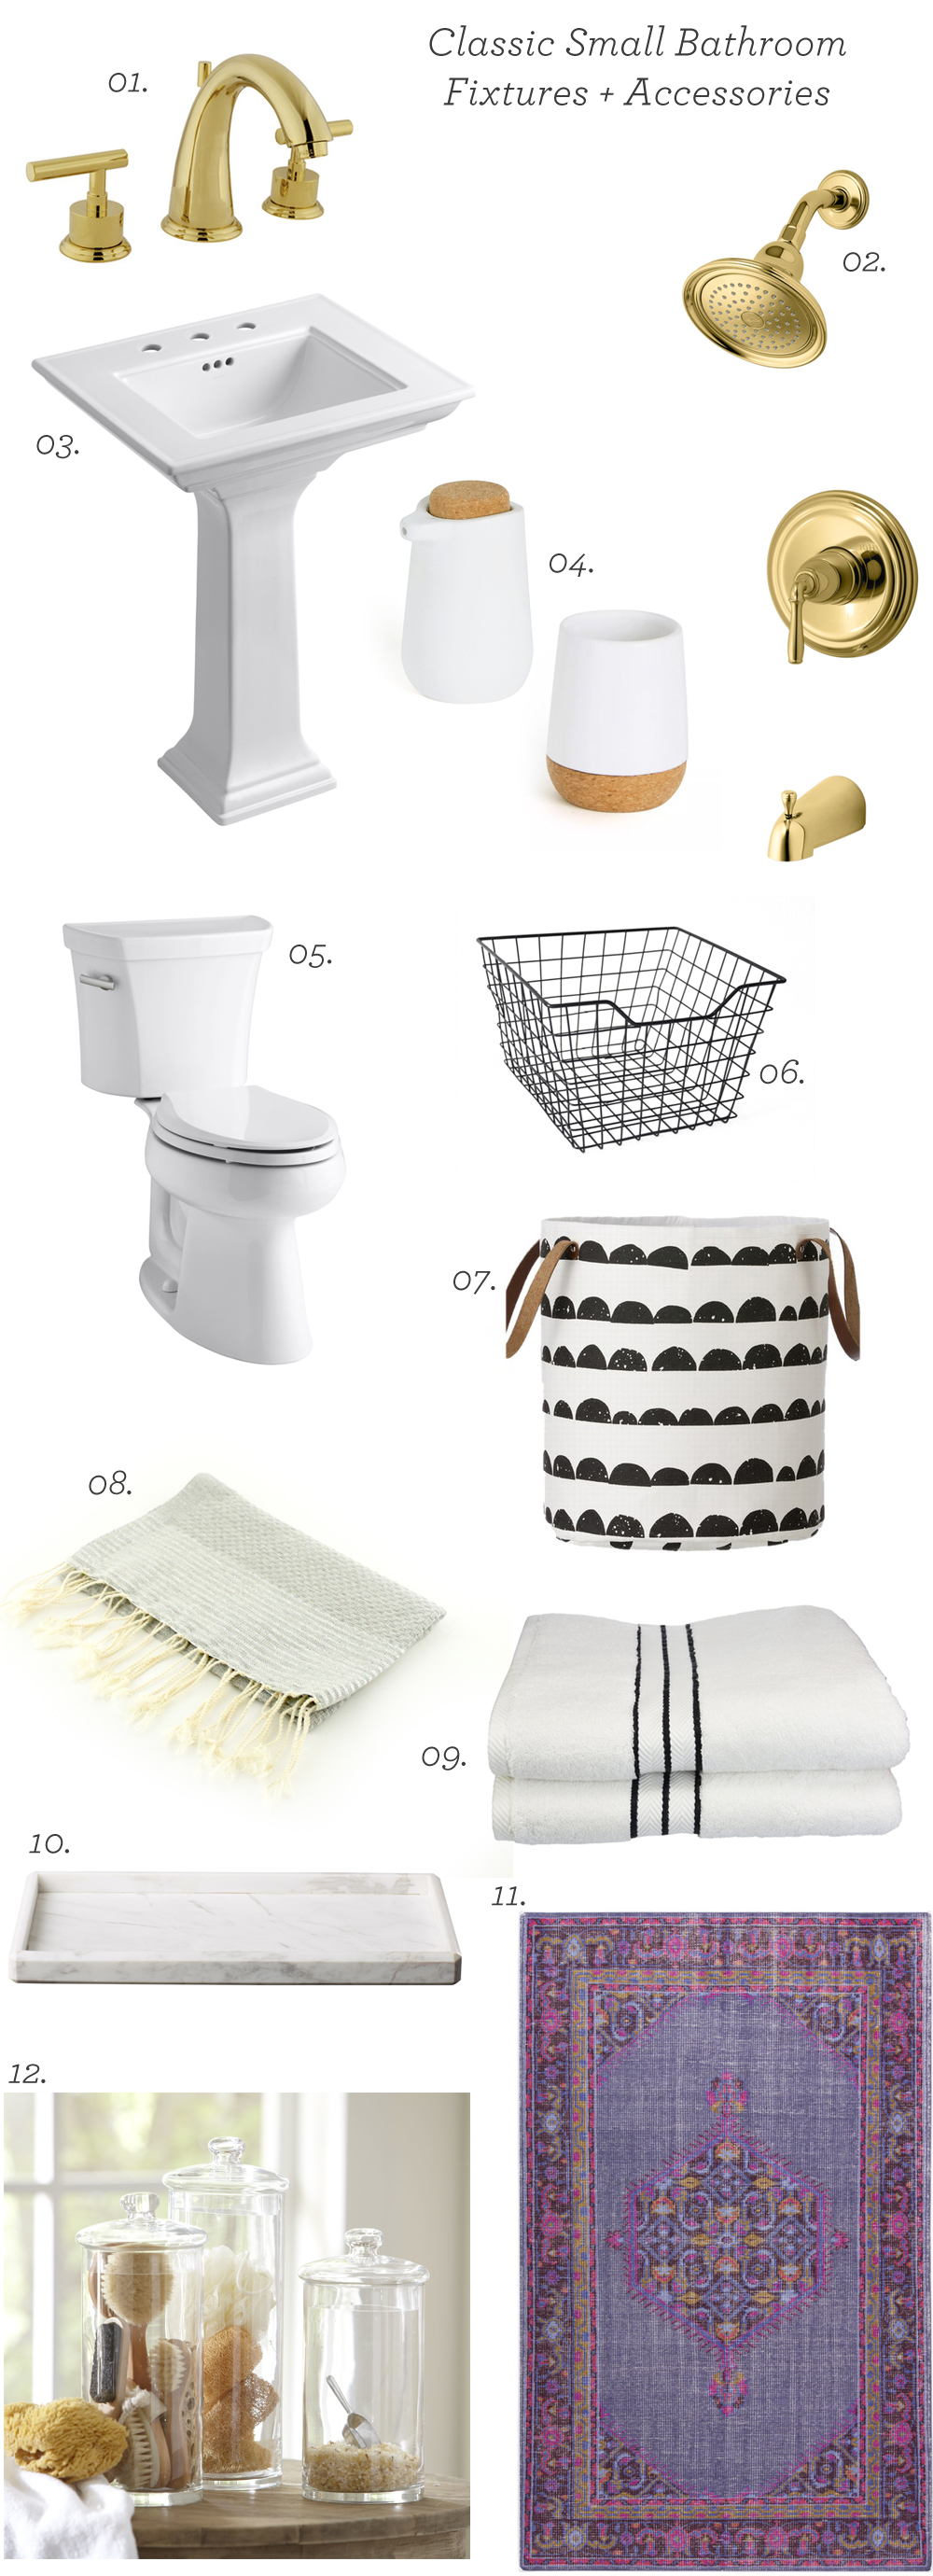 Beautiful and Classic Small Bathroom Fixtures and Accessories